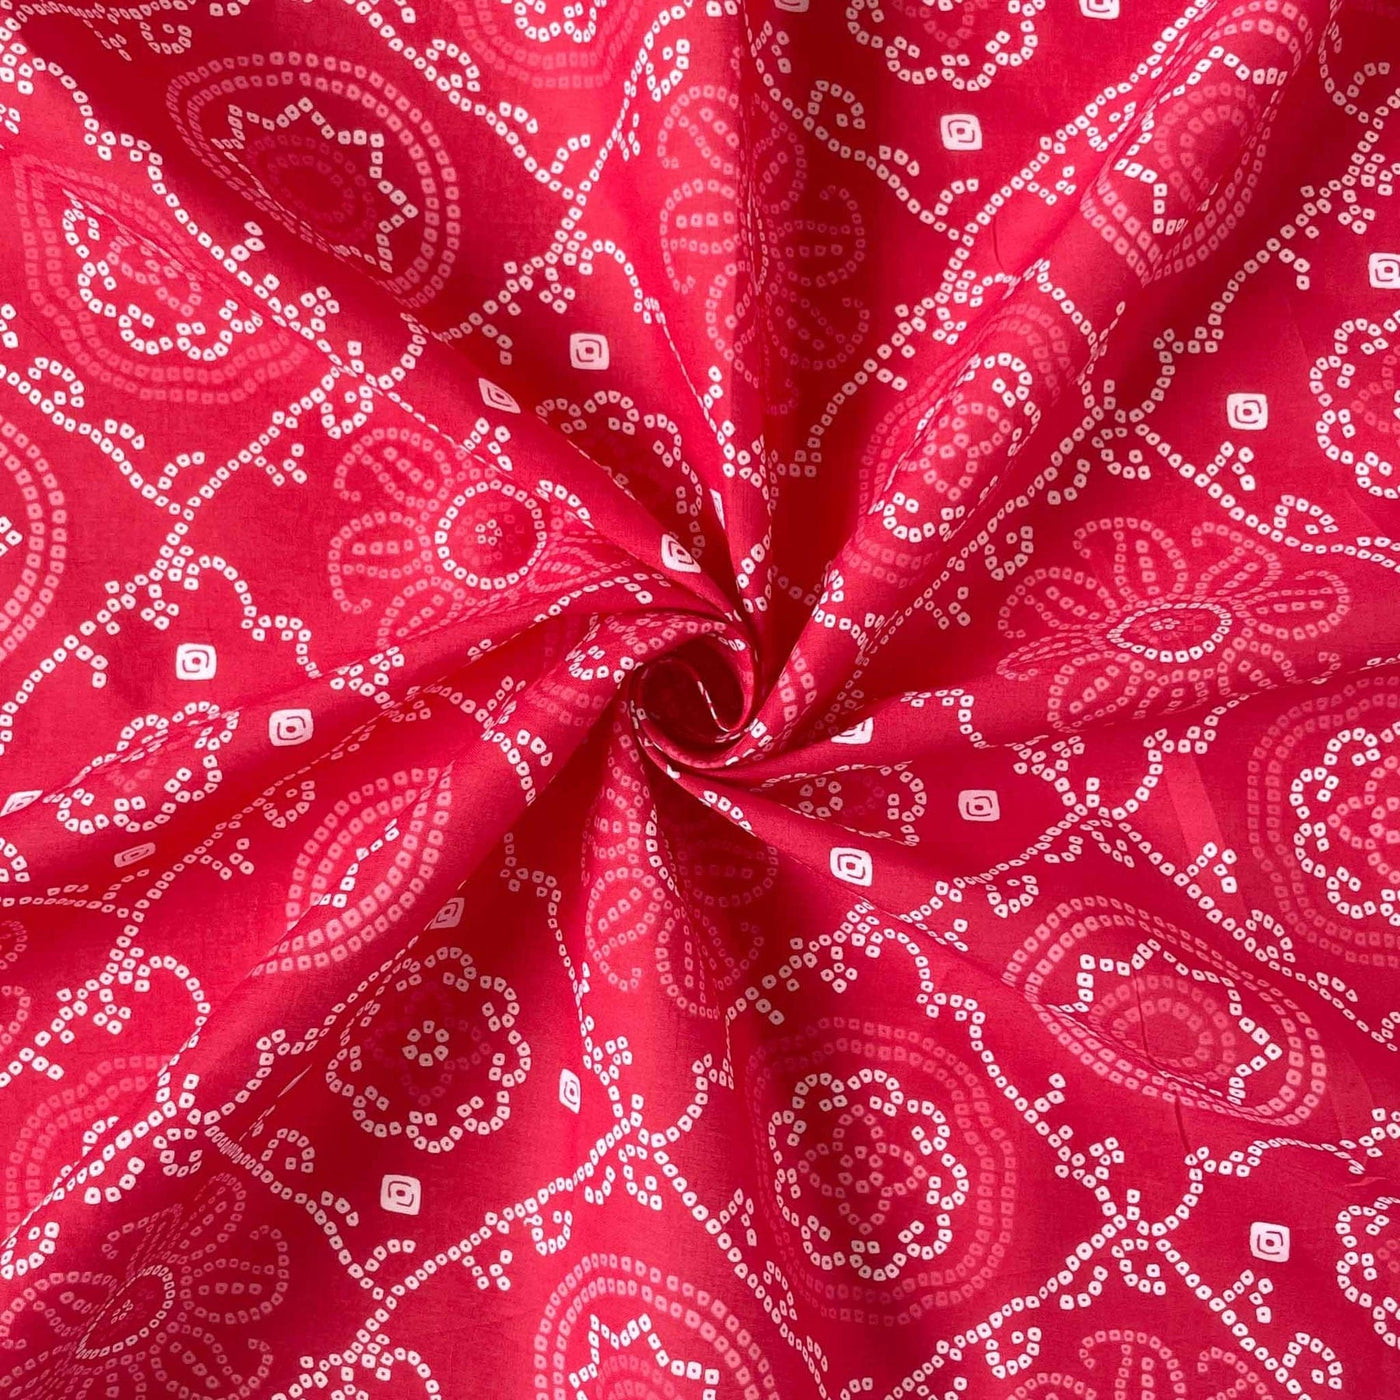 Fabric Pandit Fabric Laal Rang Traditional Floral Bandhani Pattern Hand Block Printed Pure Cotton Fabric Width (43 inches)